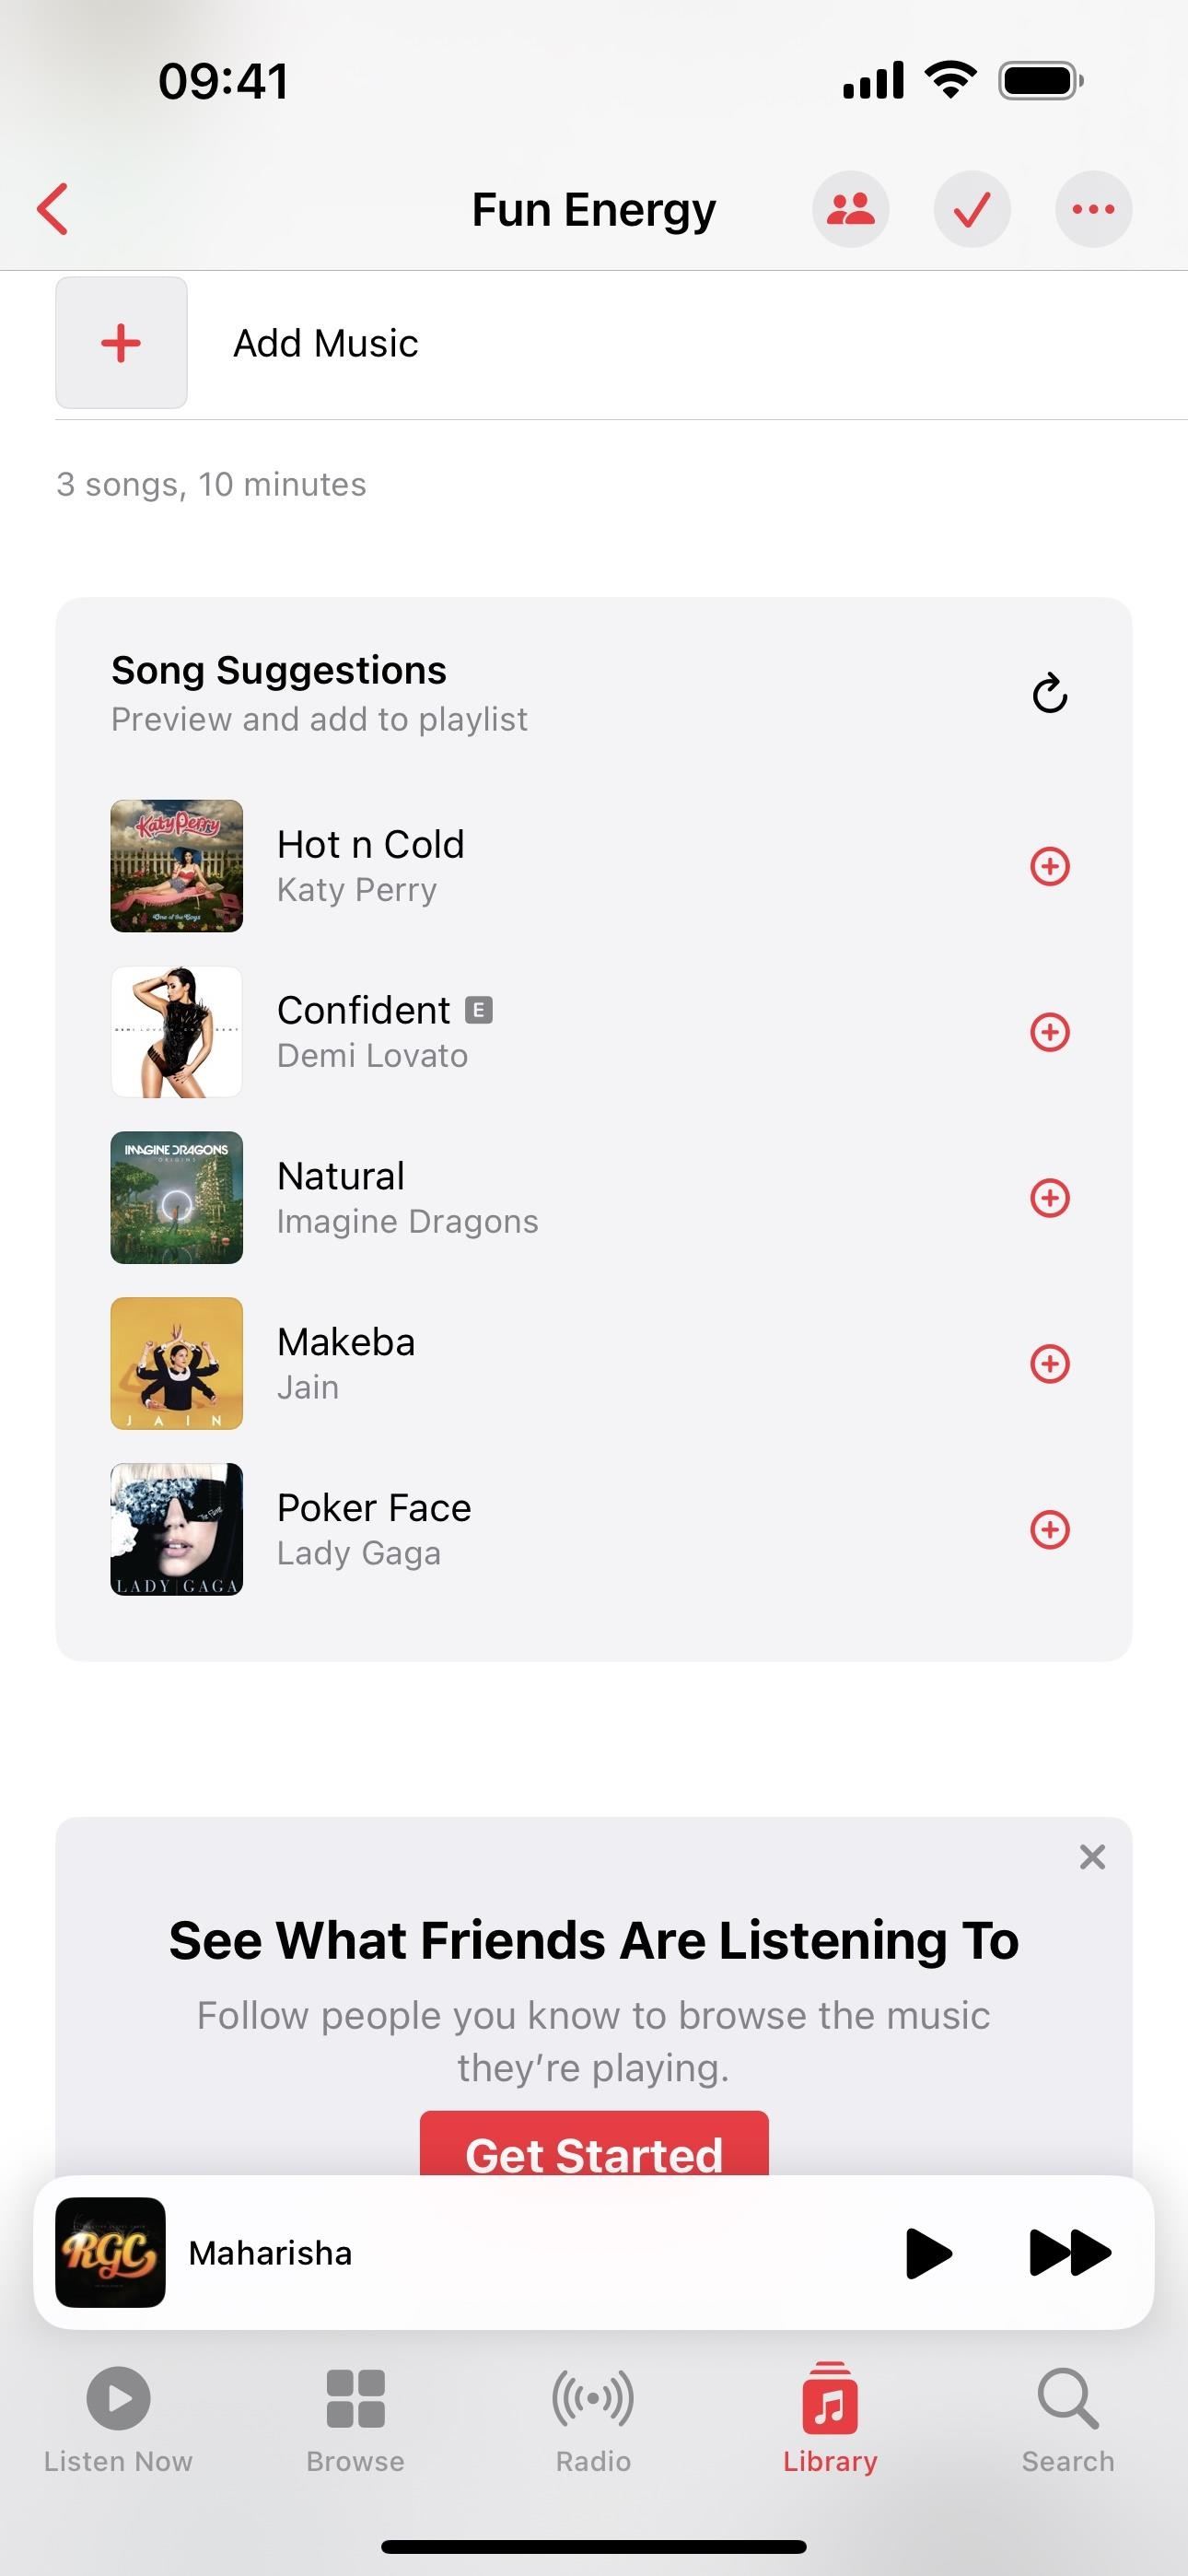 How to Create a Collaborative Playlist on Apple Music with Your Friends